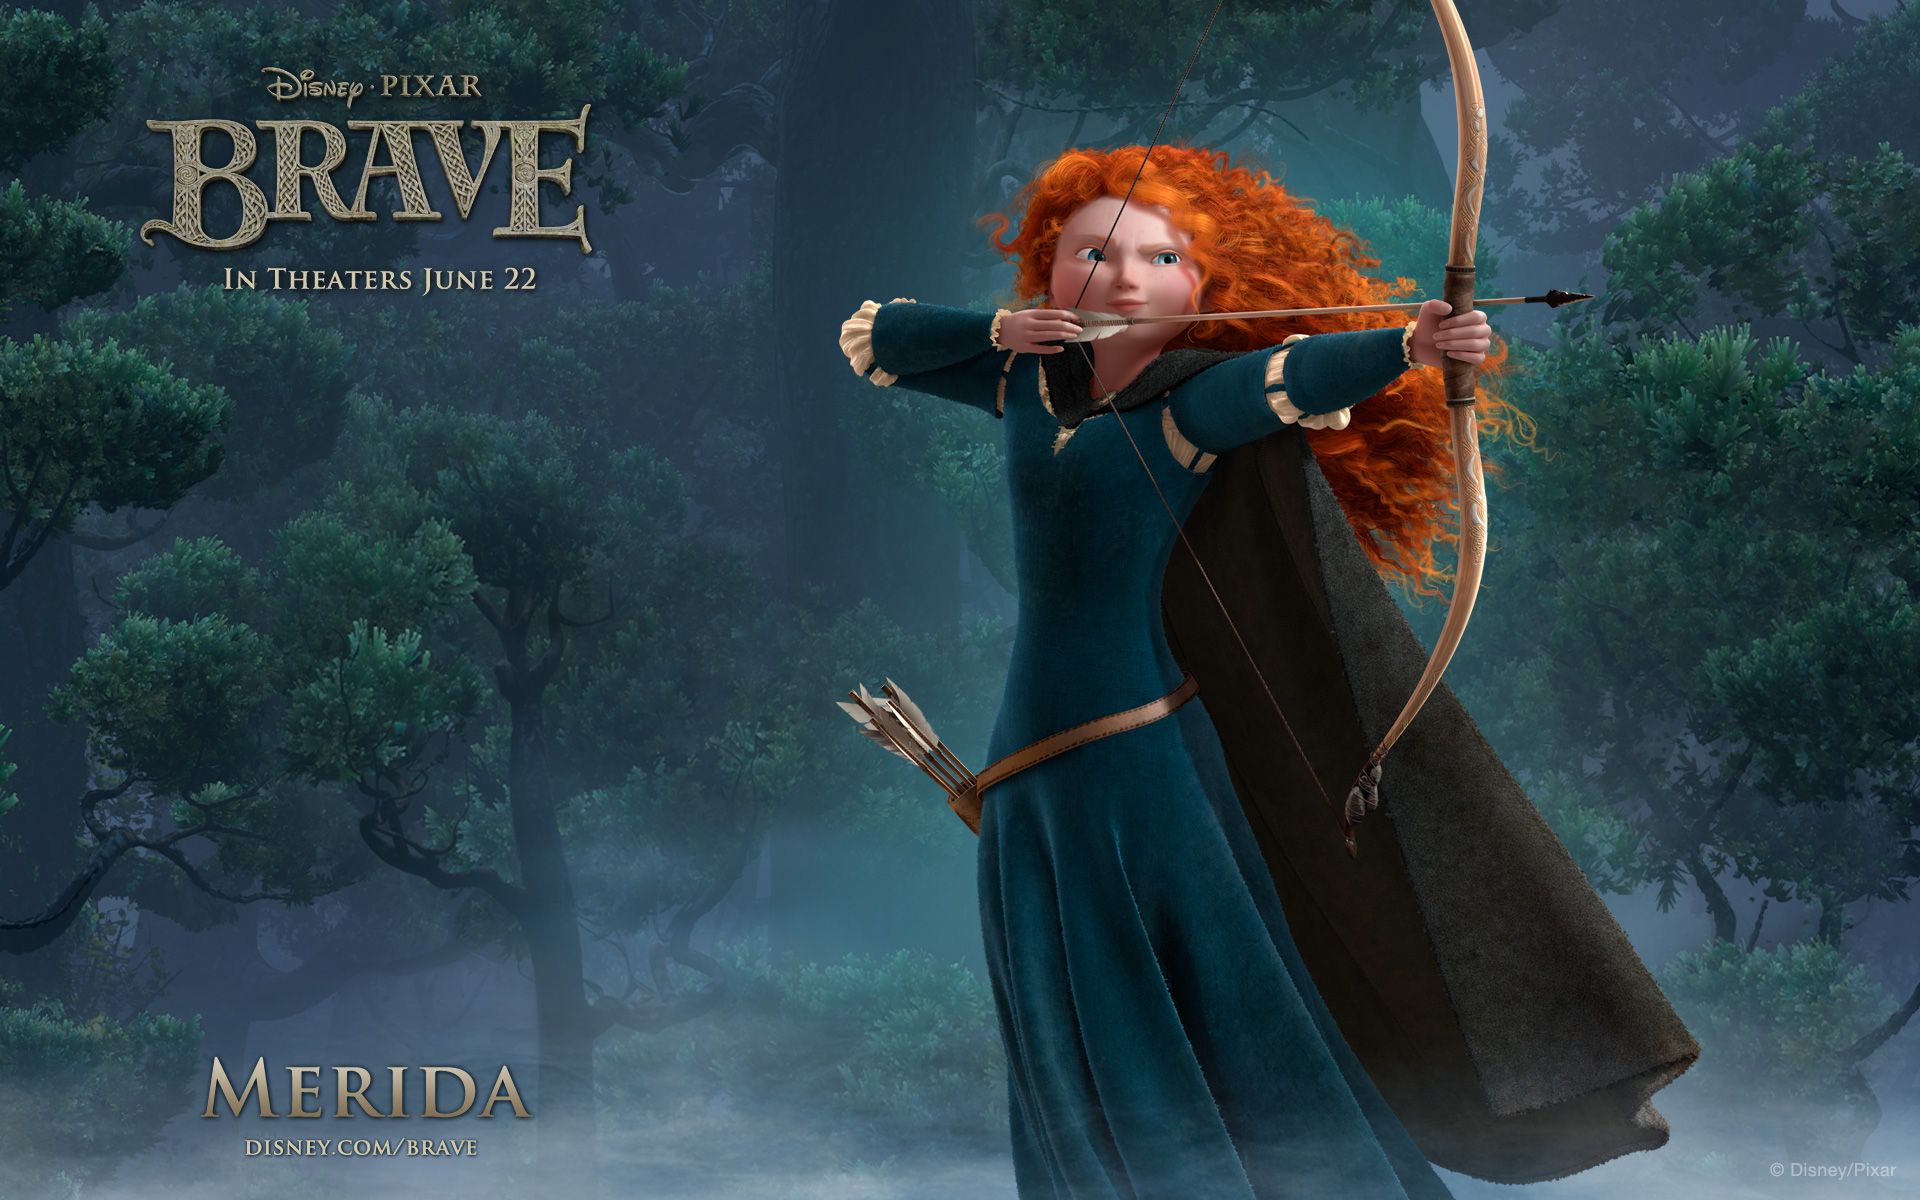 Merida 4K wallpaper for your desktop or mobile screen free and easy to download